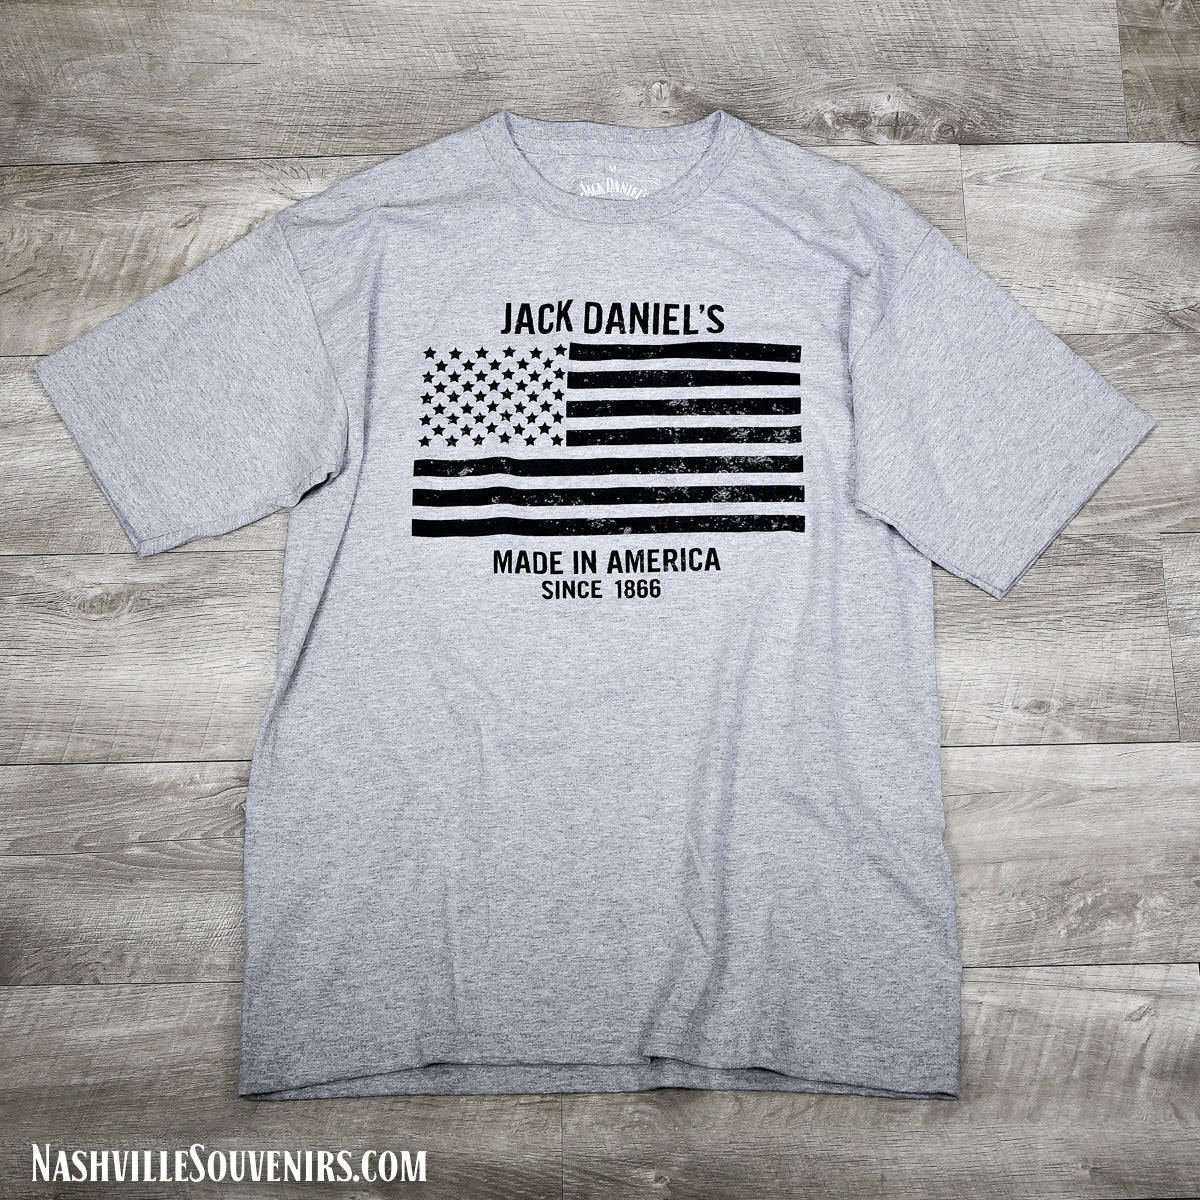 Officially licensed Jack Daniels Made in America T-shirt. Made in America since 1866. FREE SHIPPING on all US orders over $75!